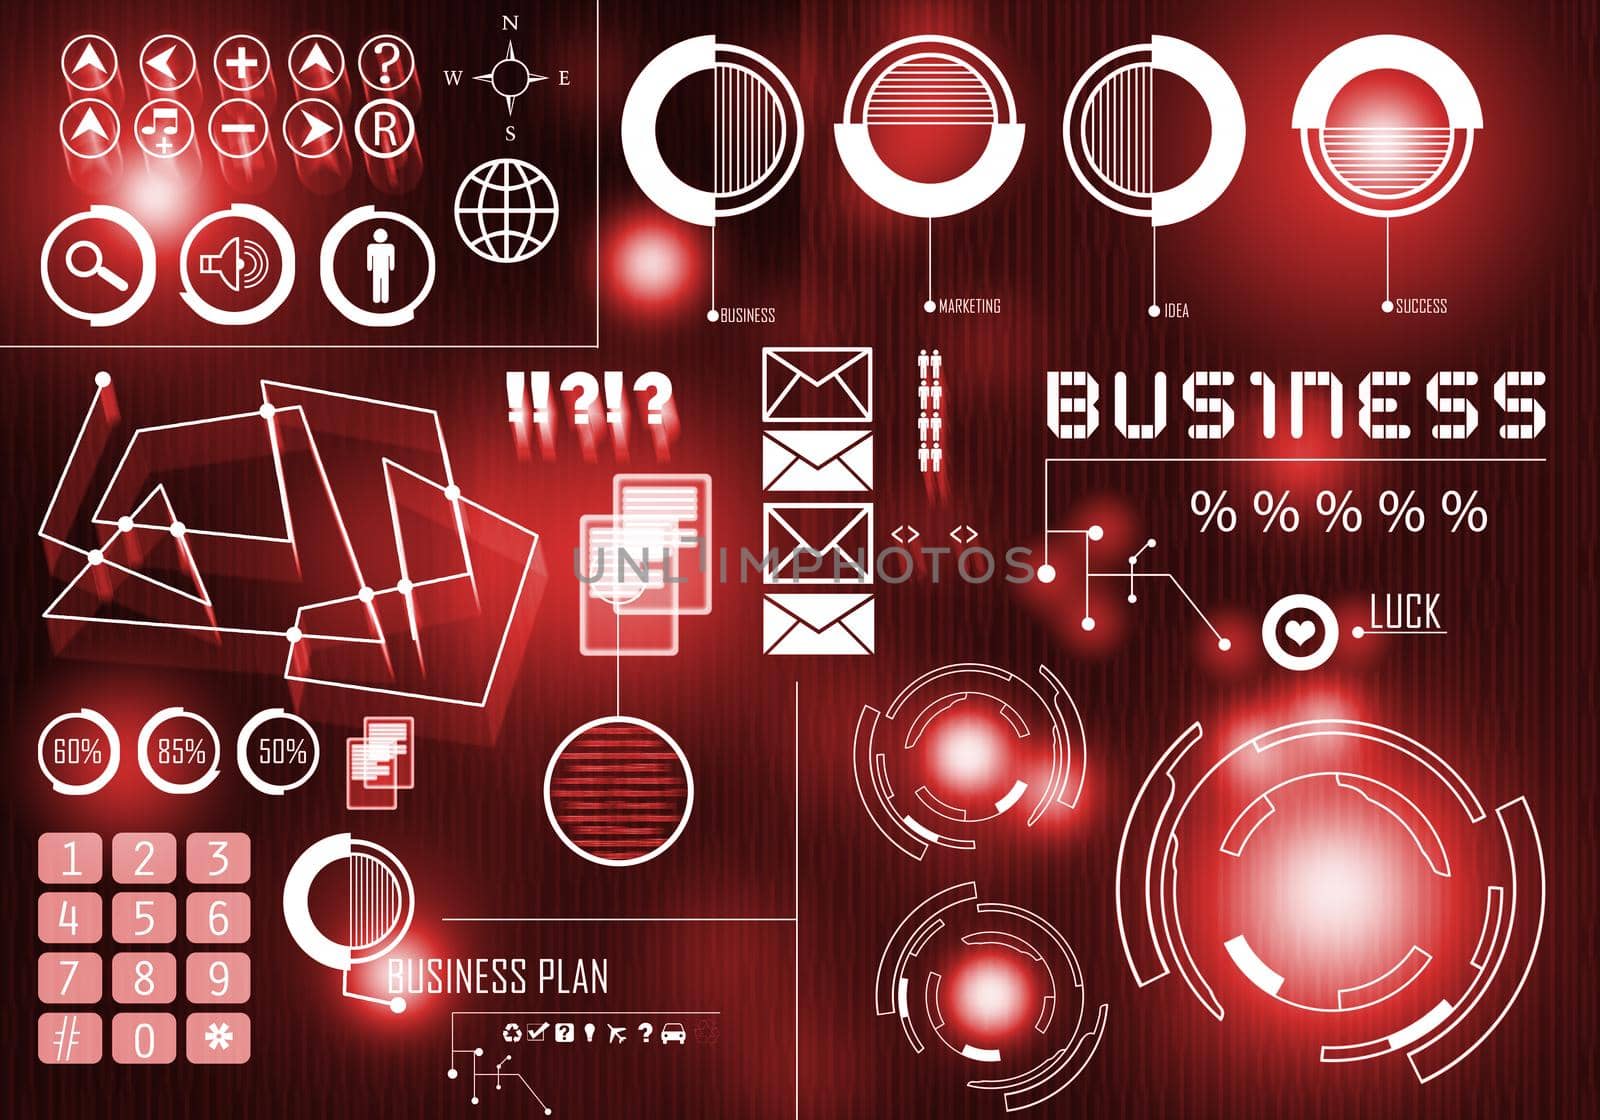 Digital business background image with icons on media screen